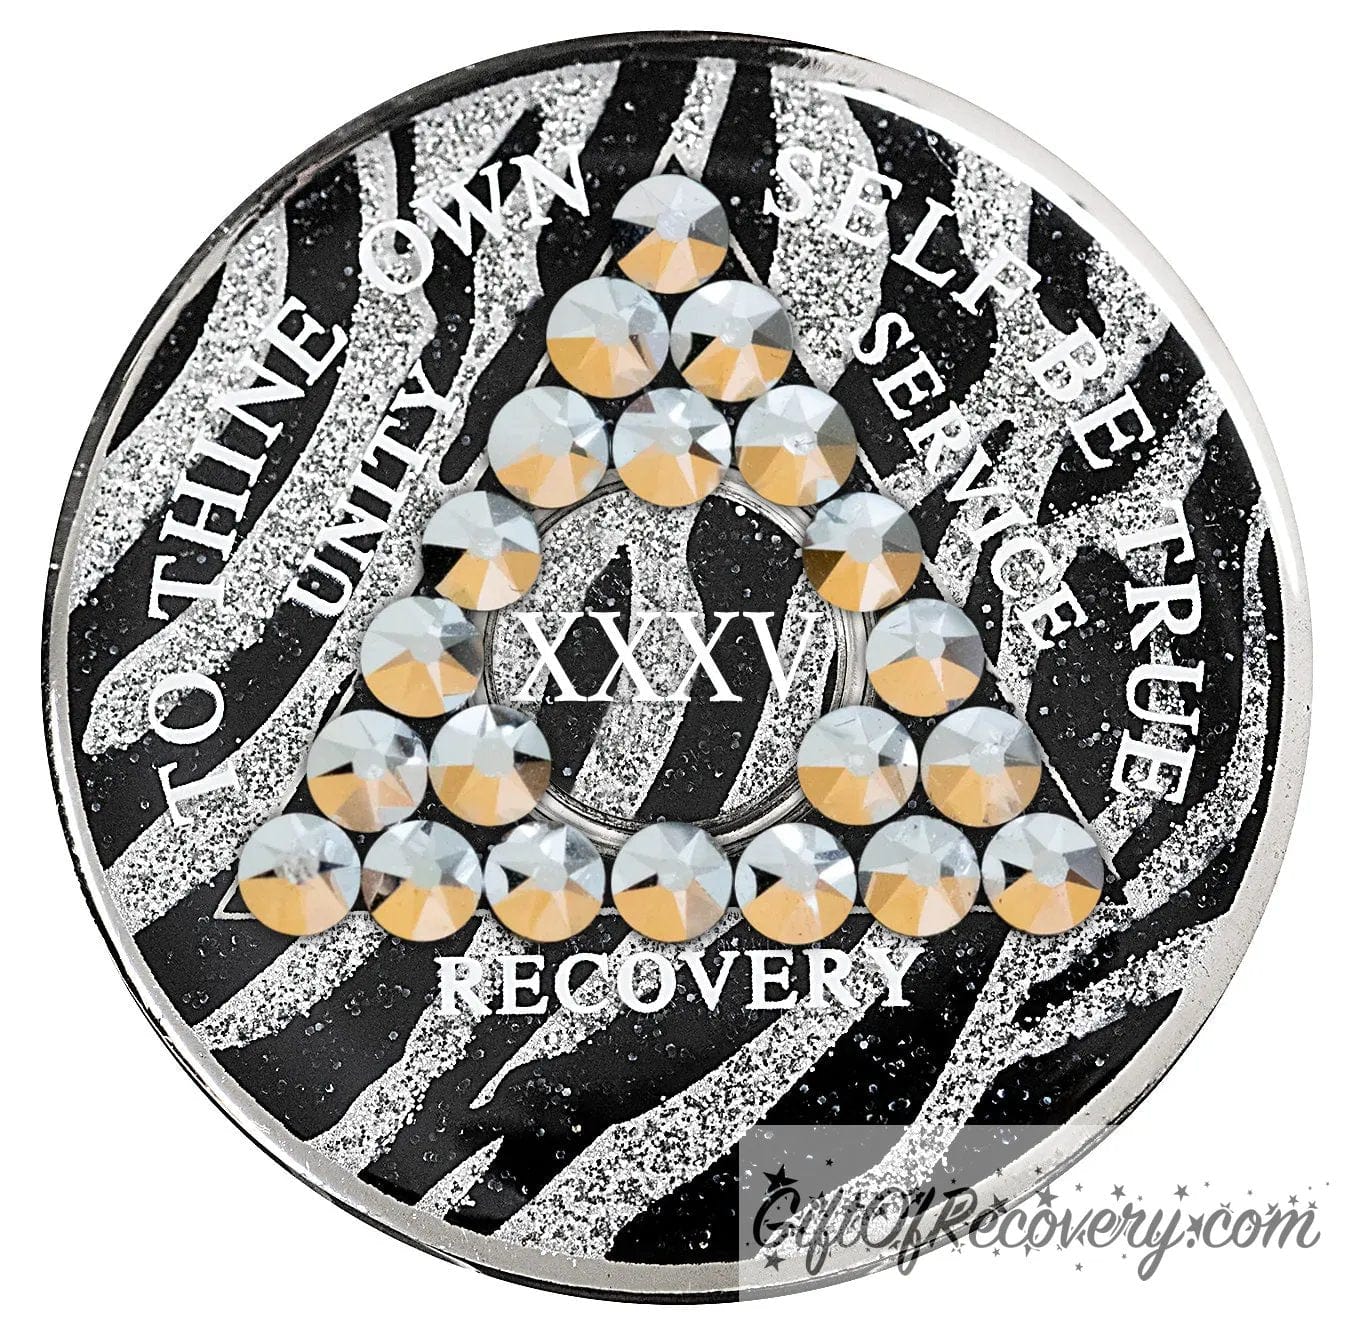 35 Year zebra glitter print, black and silver, AA medallion with 21 genuine comet crystals in a triangle around the year, the lettering unity, service, recovery, the 1 year and To Thine Own Self Be True are in white and the recovery medallion rim is silver.